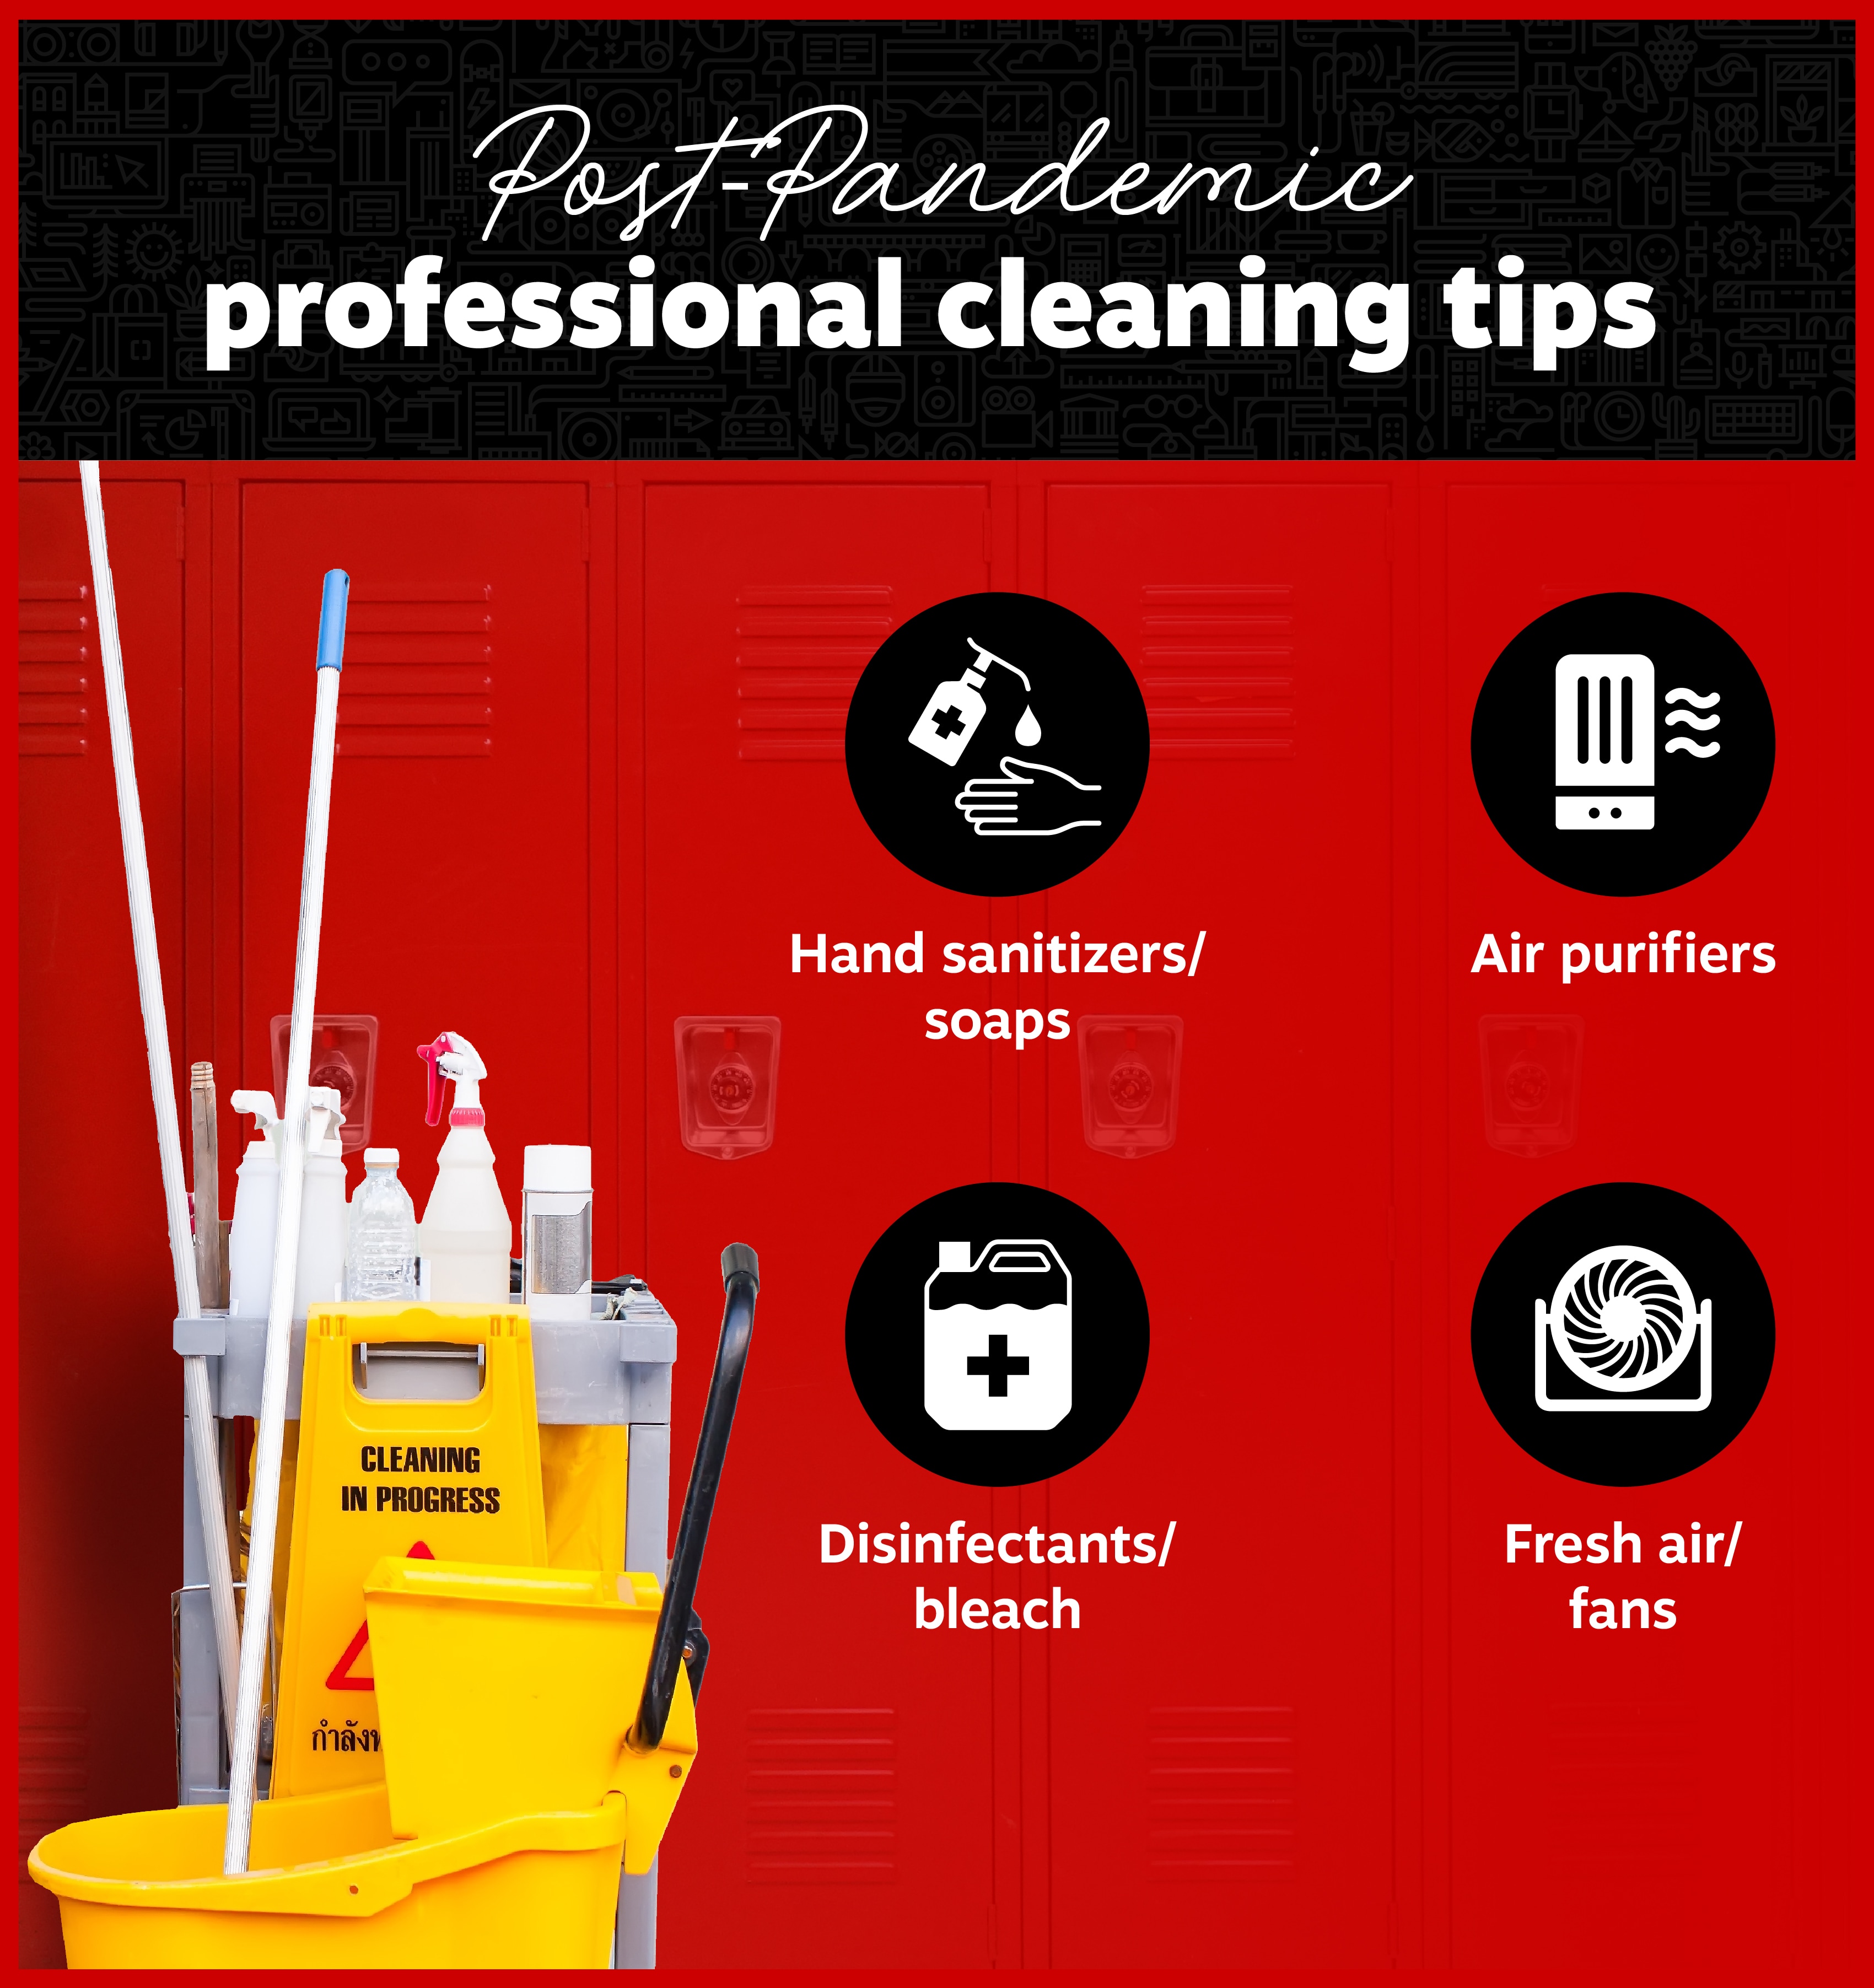 COVID-19 Cleaning Tips for the Workplace